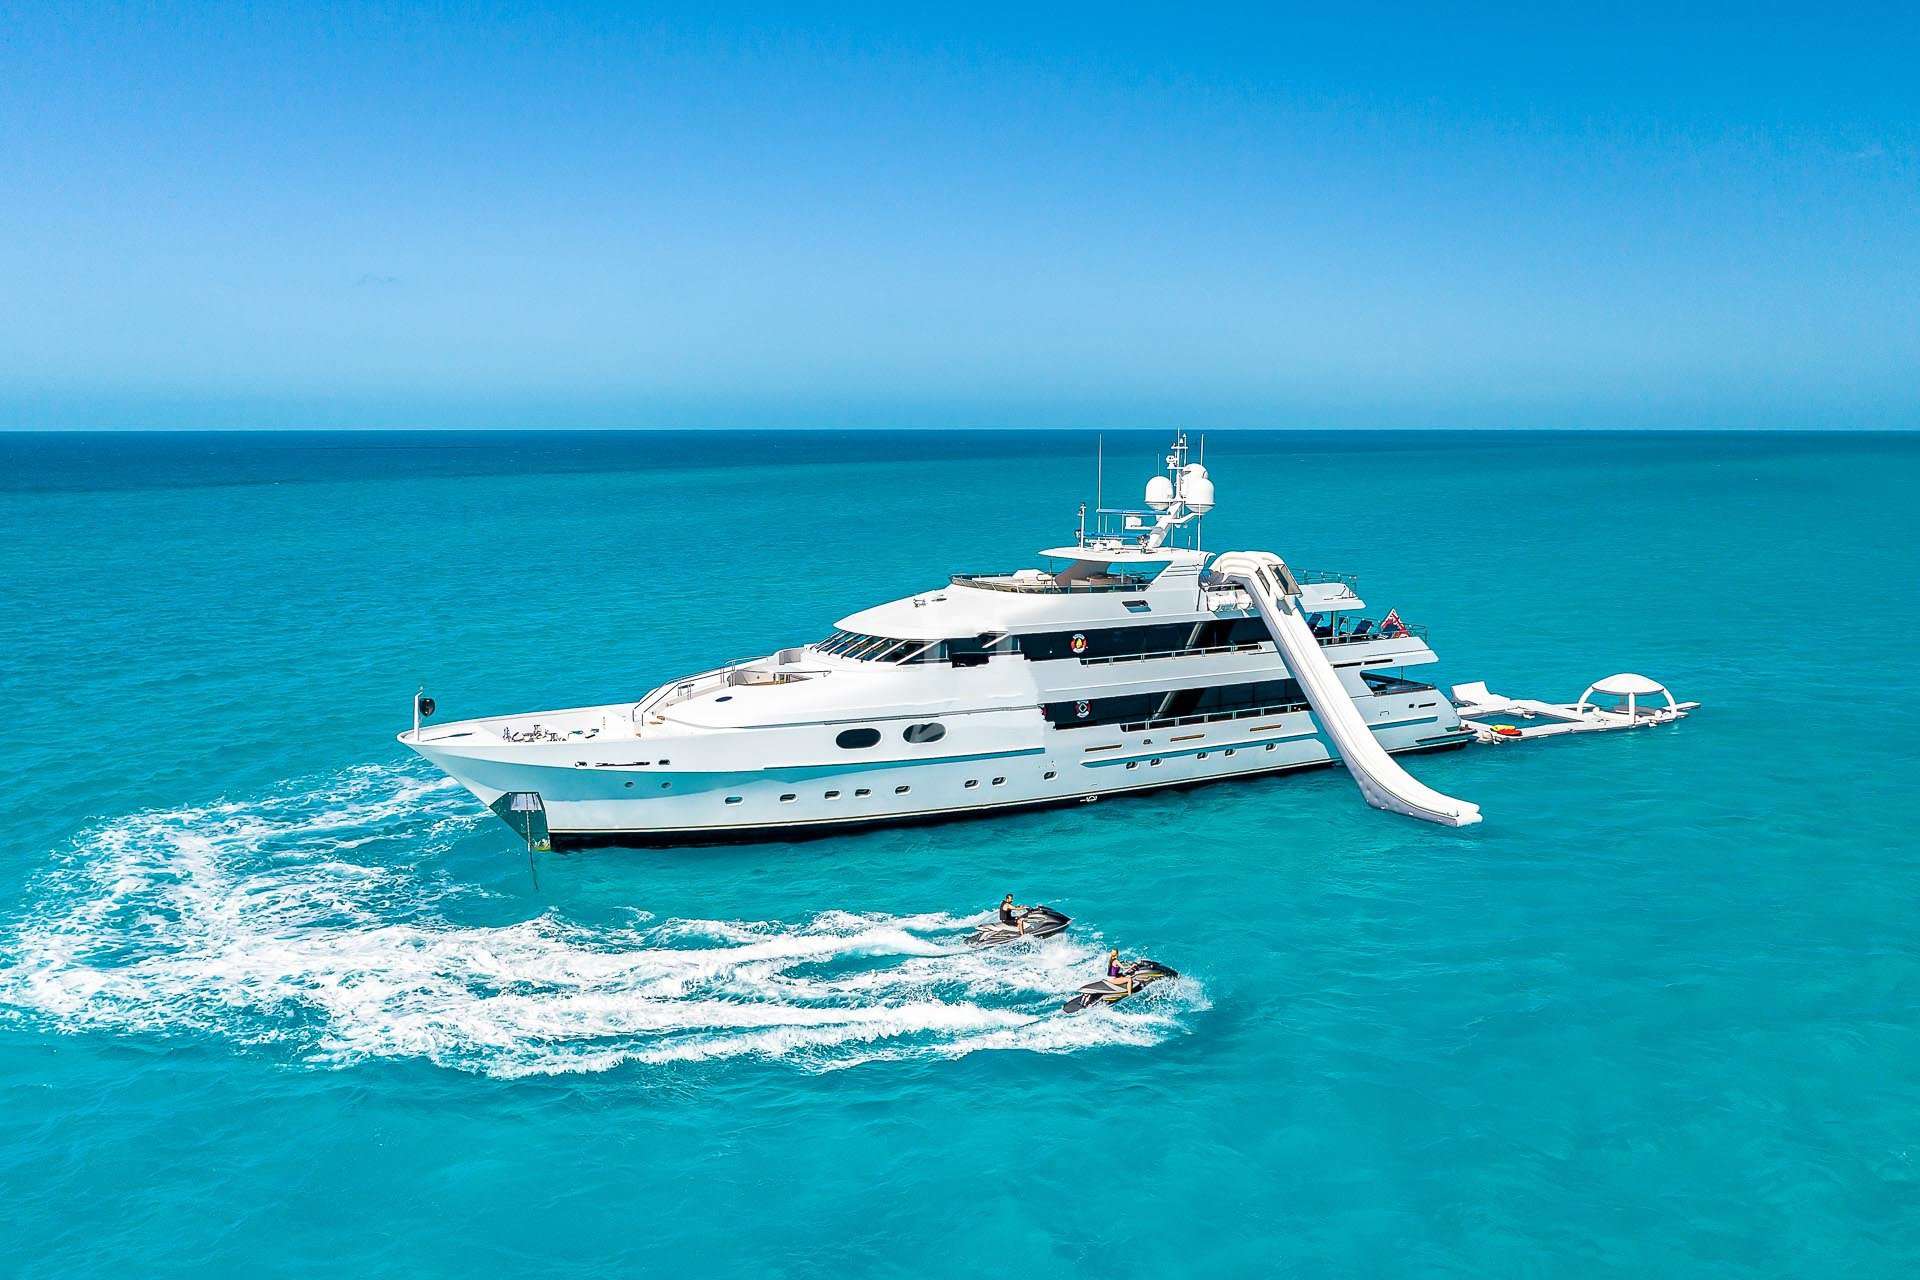 Yacht Rental in the Bahamas will turn your Dream into reality.